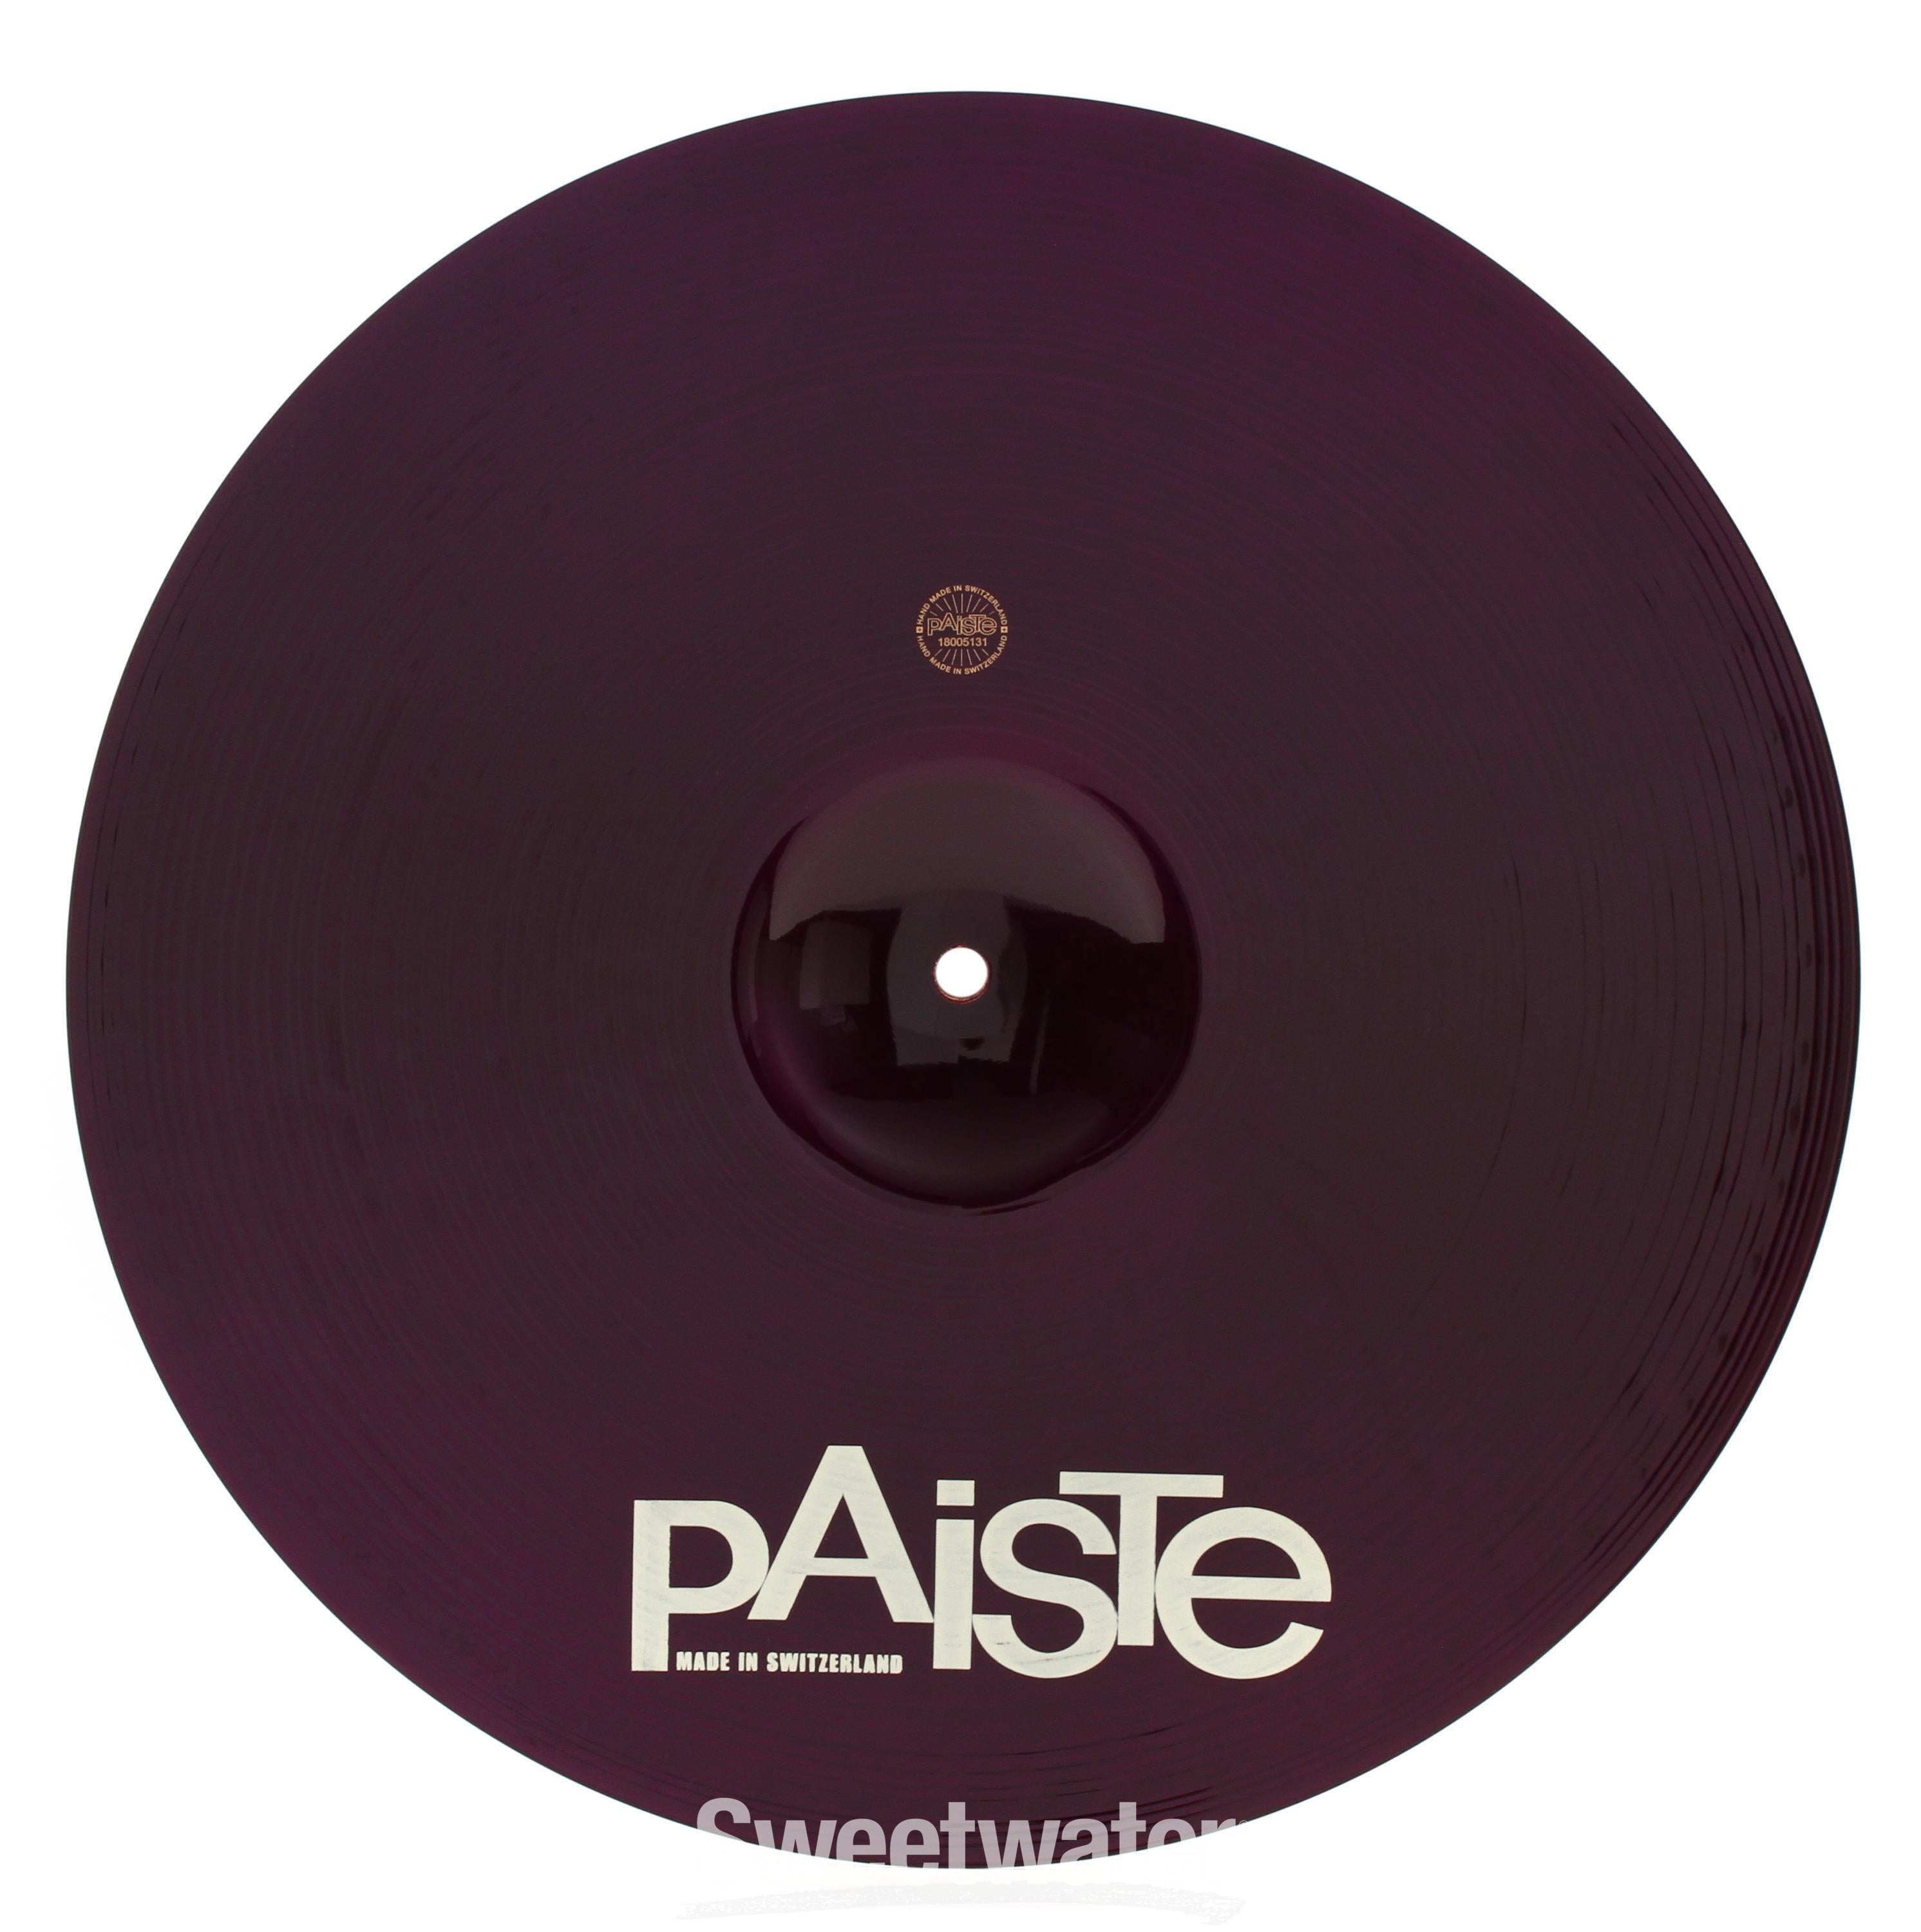 Paiste 18 inch Color Sound 900 Purple Crash Cymbal | Sweetwater